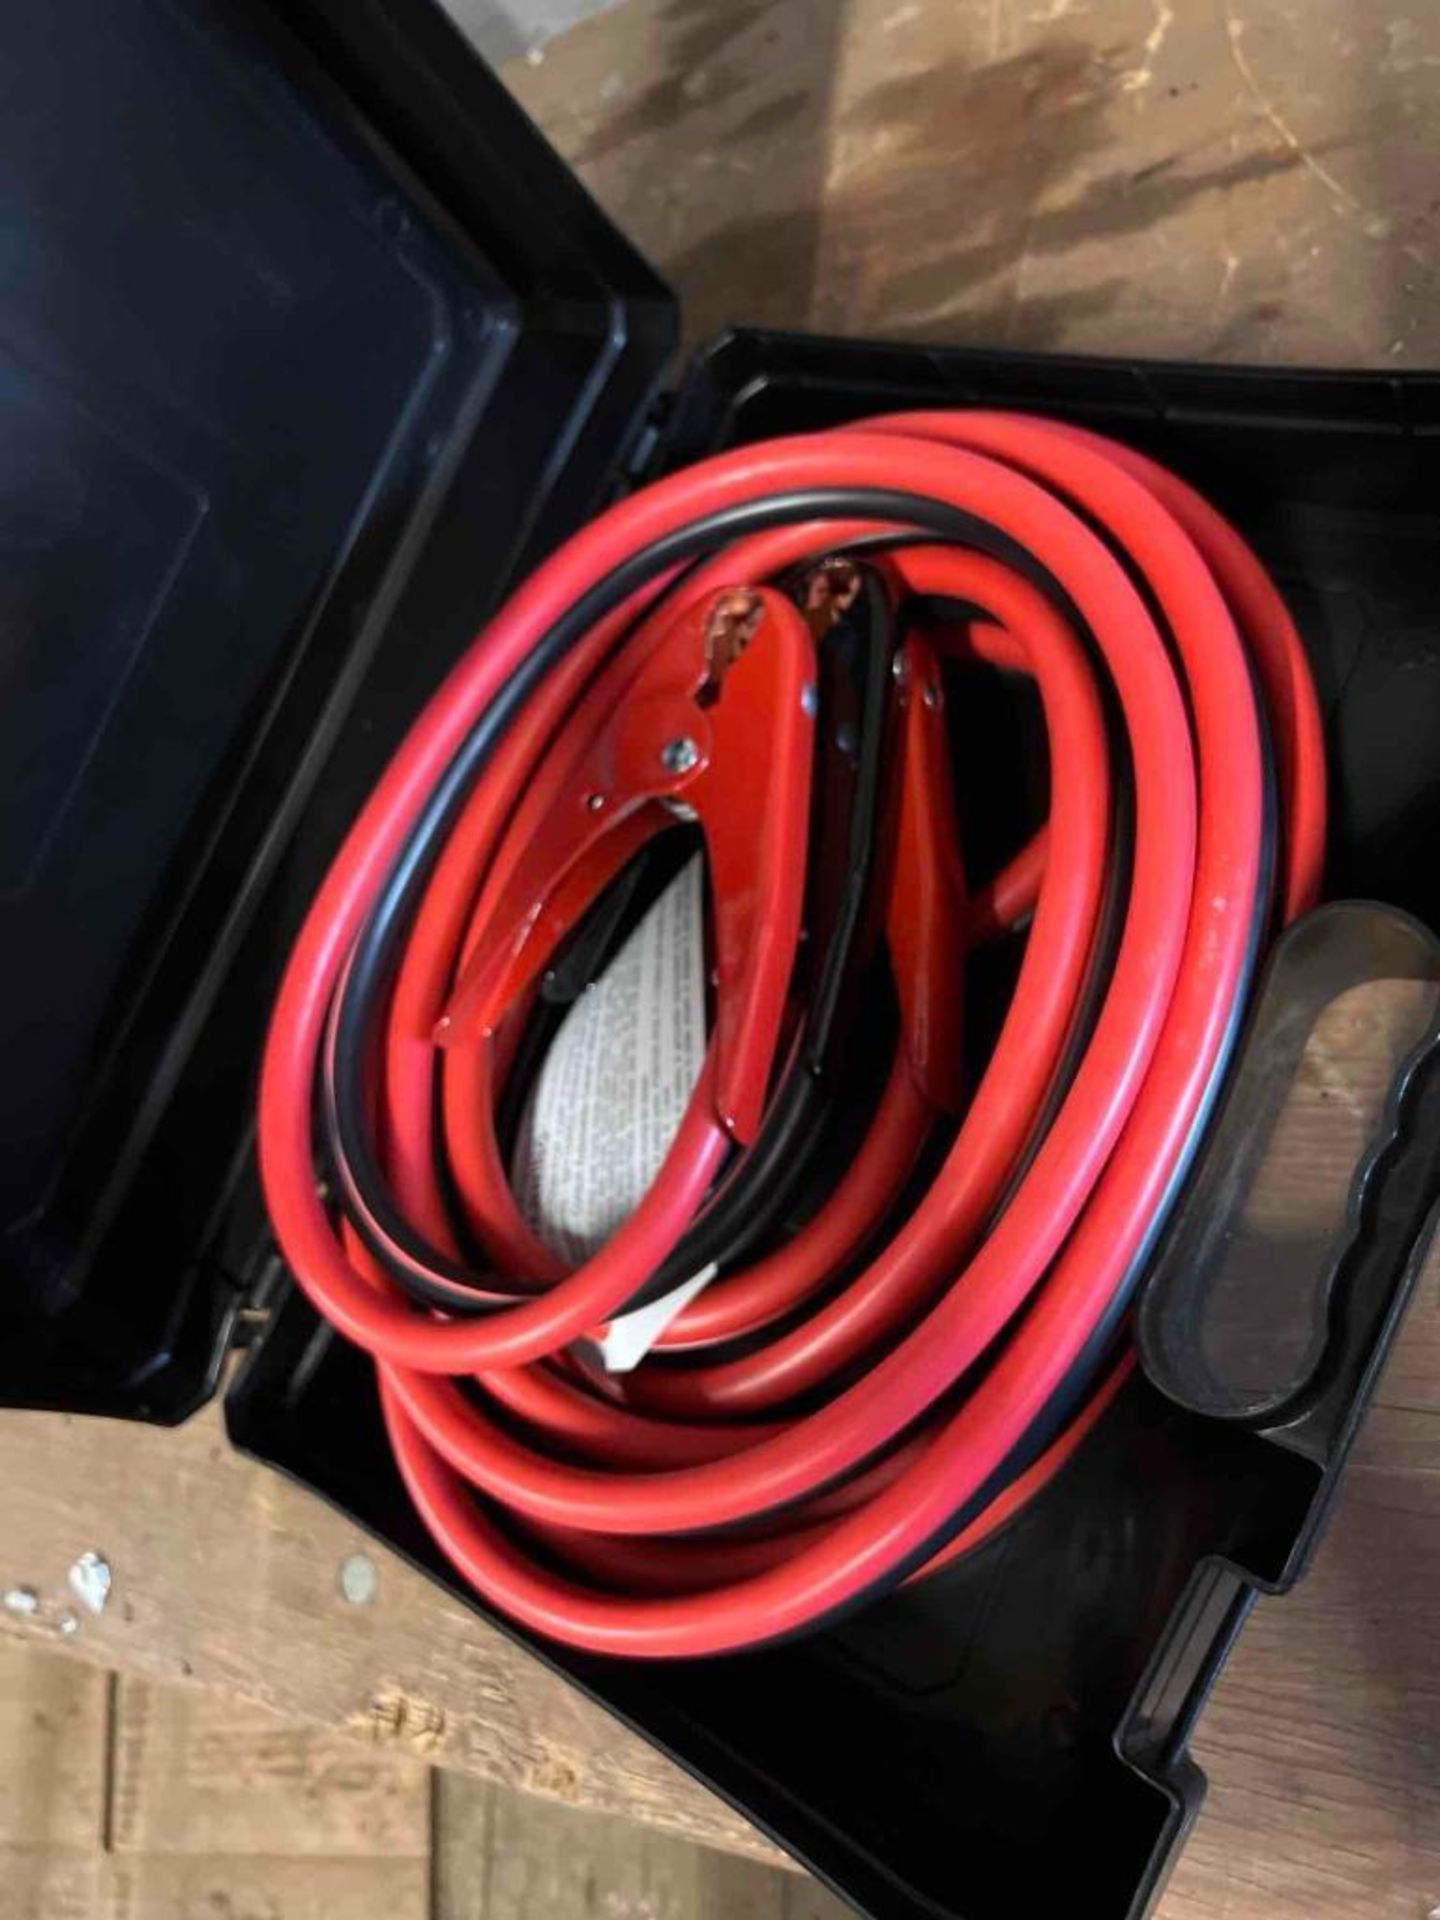 25 ft jumper cables - Image 4 of 4